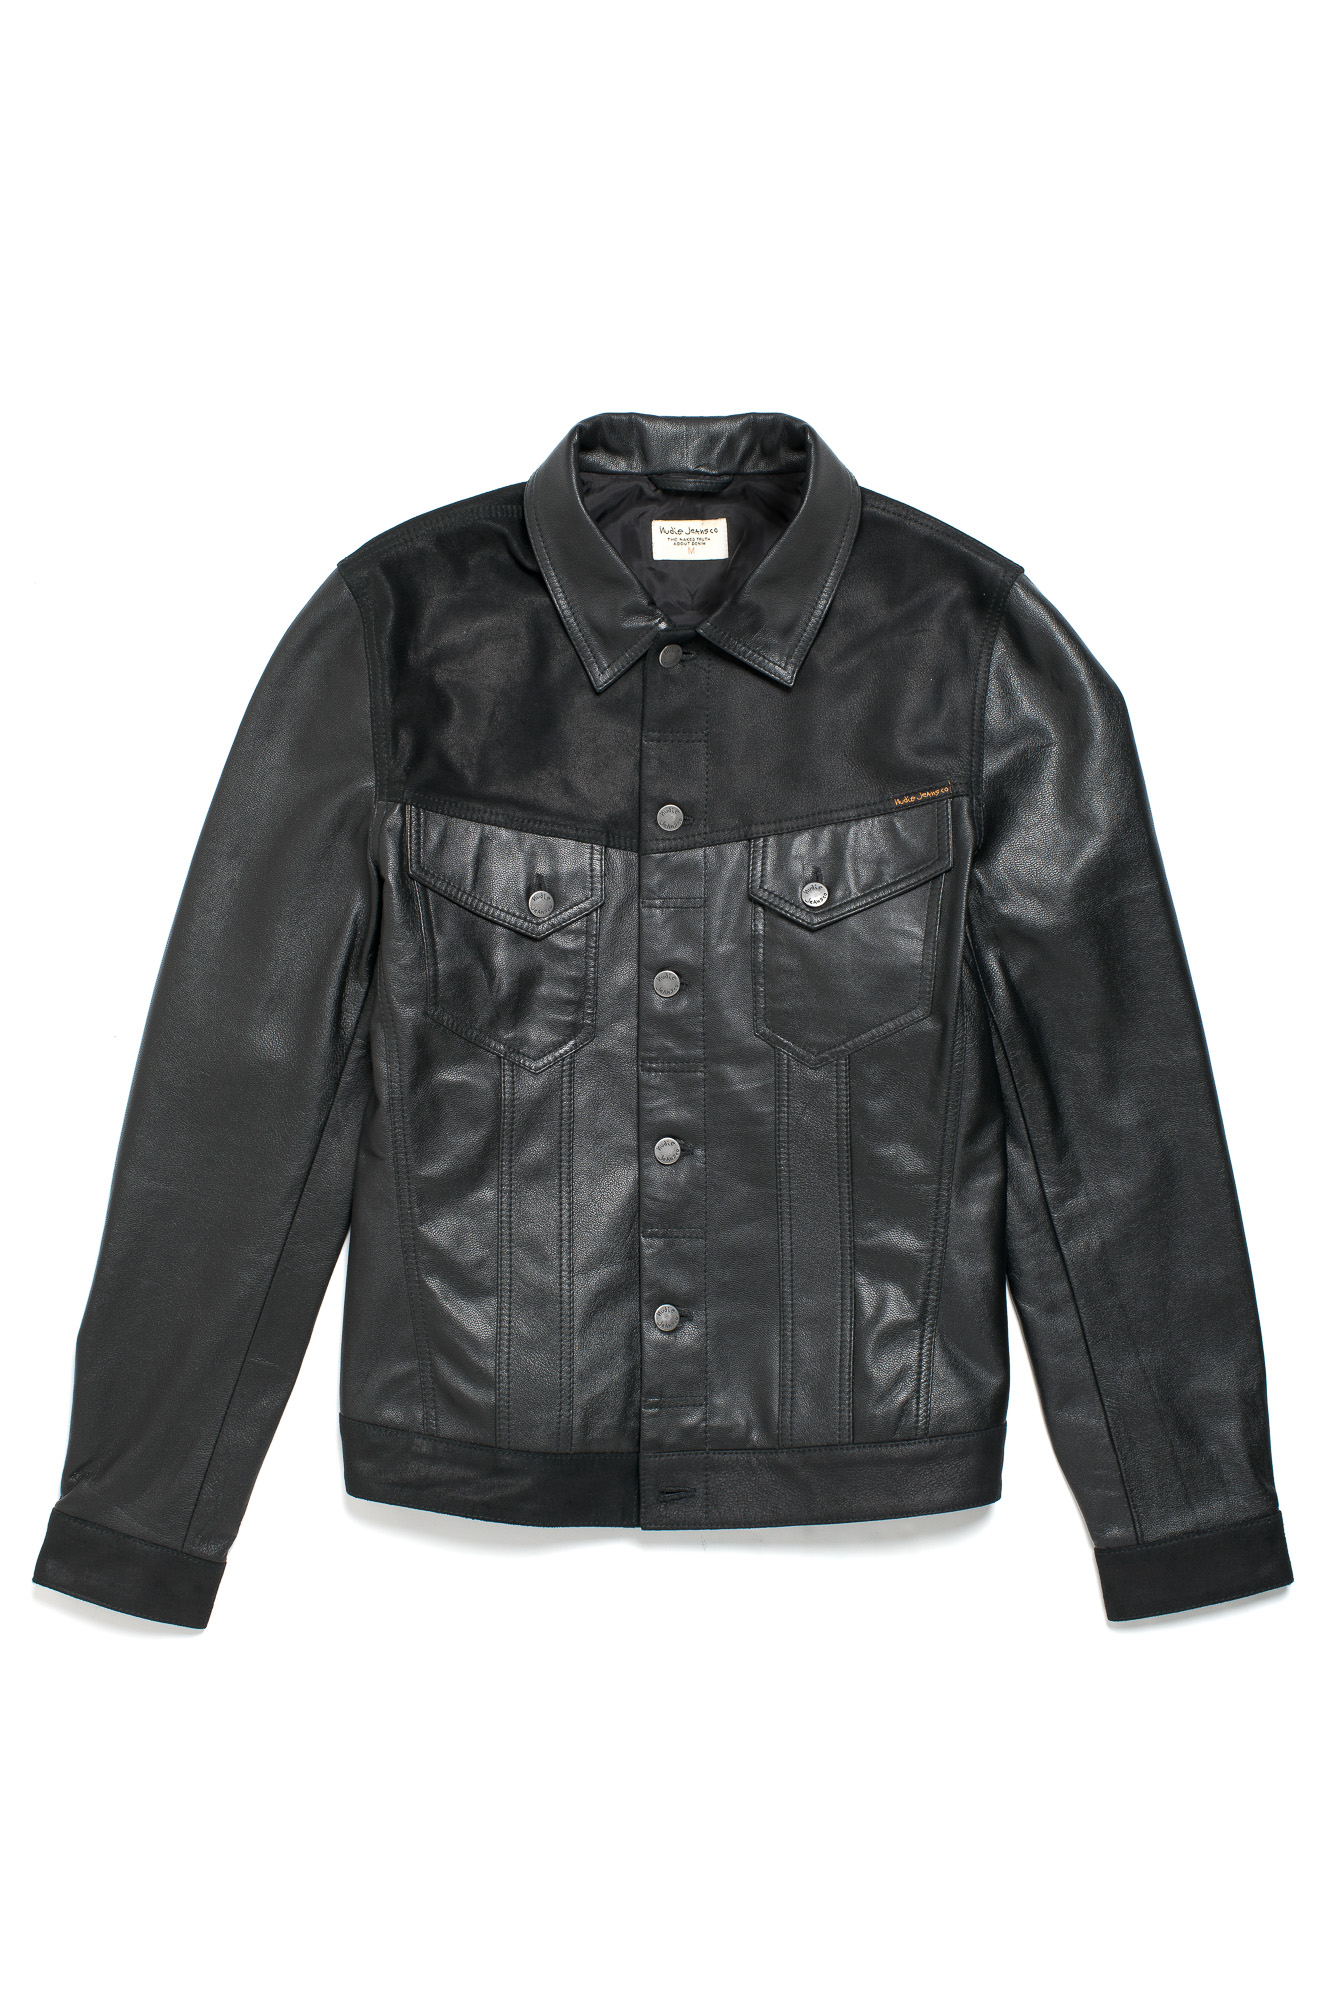 Perry Leather _ Crust Jkt Black 160339 01